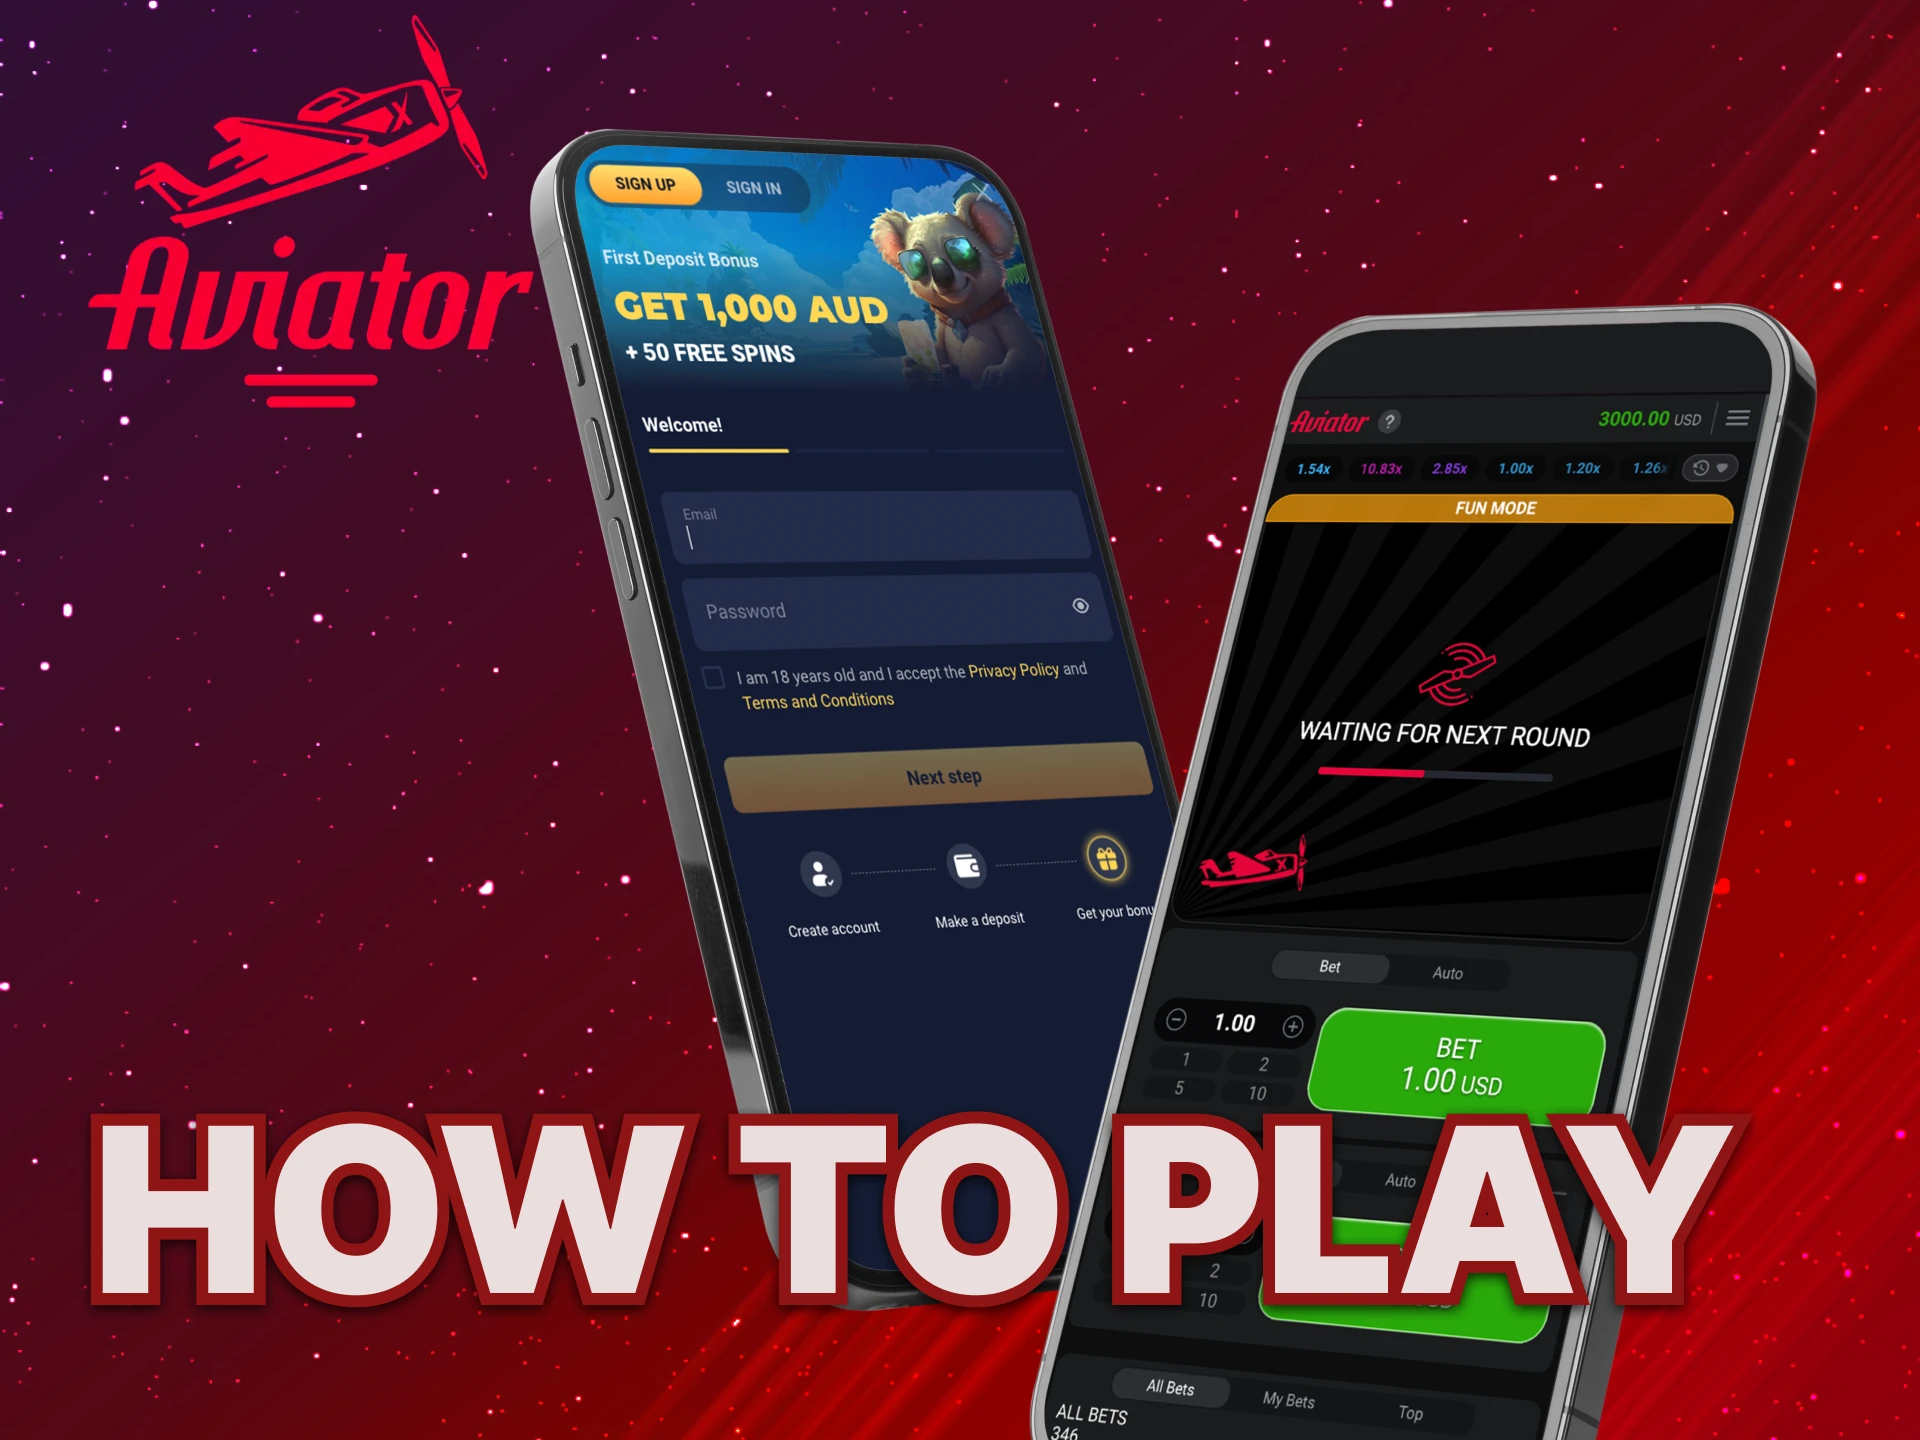 Step-by-step instructions on how to start playing Aviator for real money.